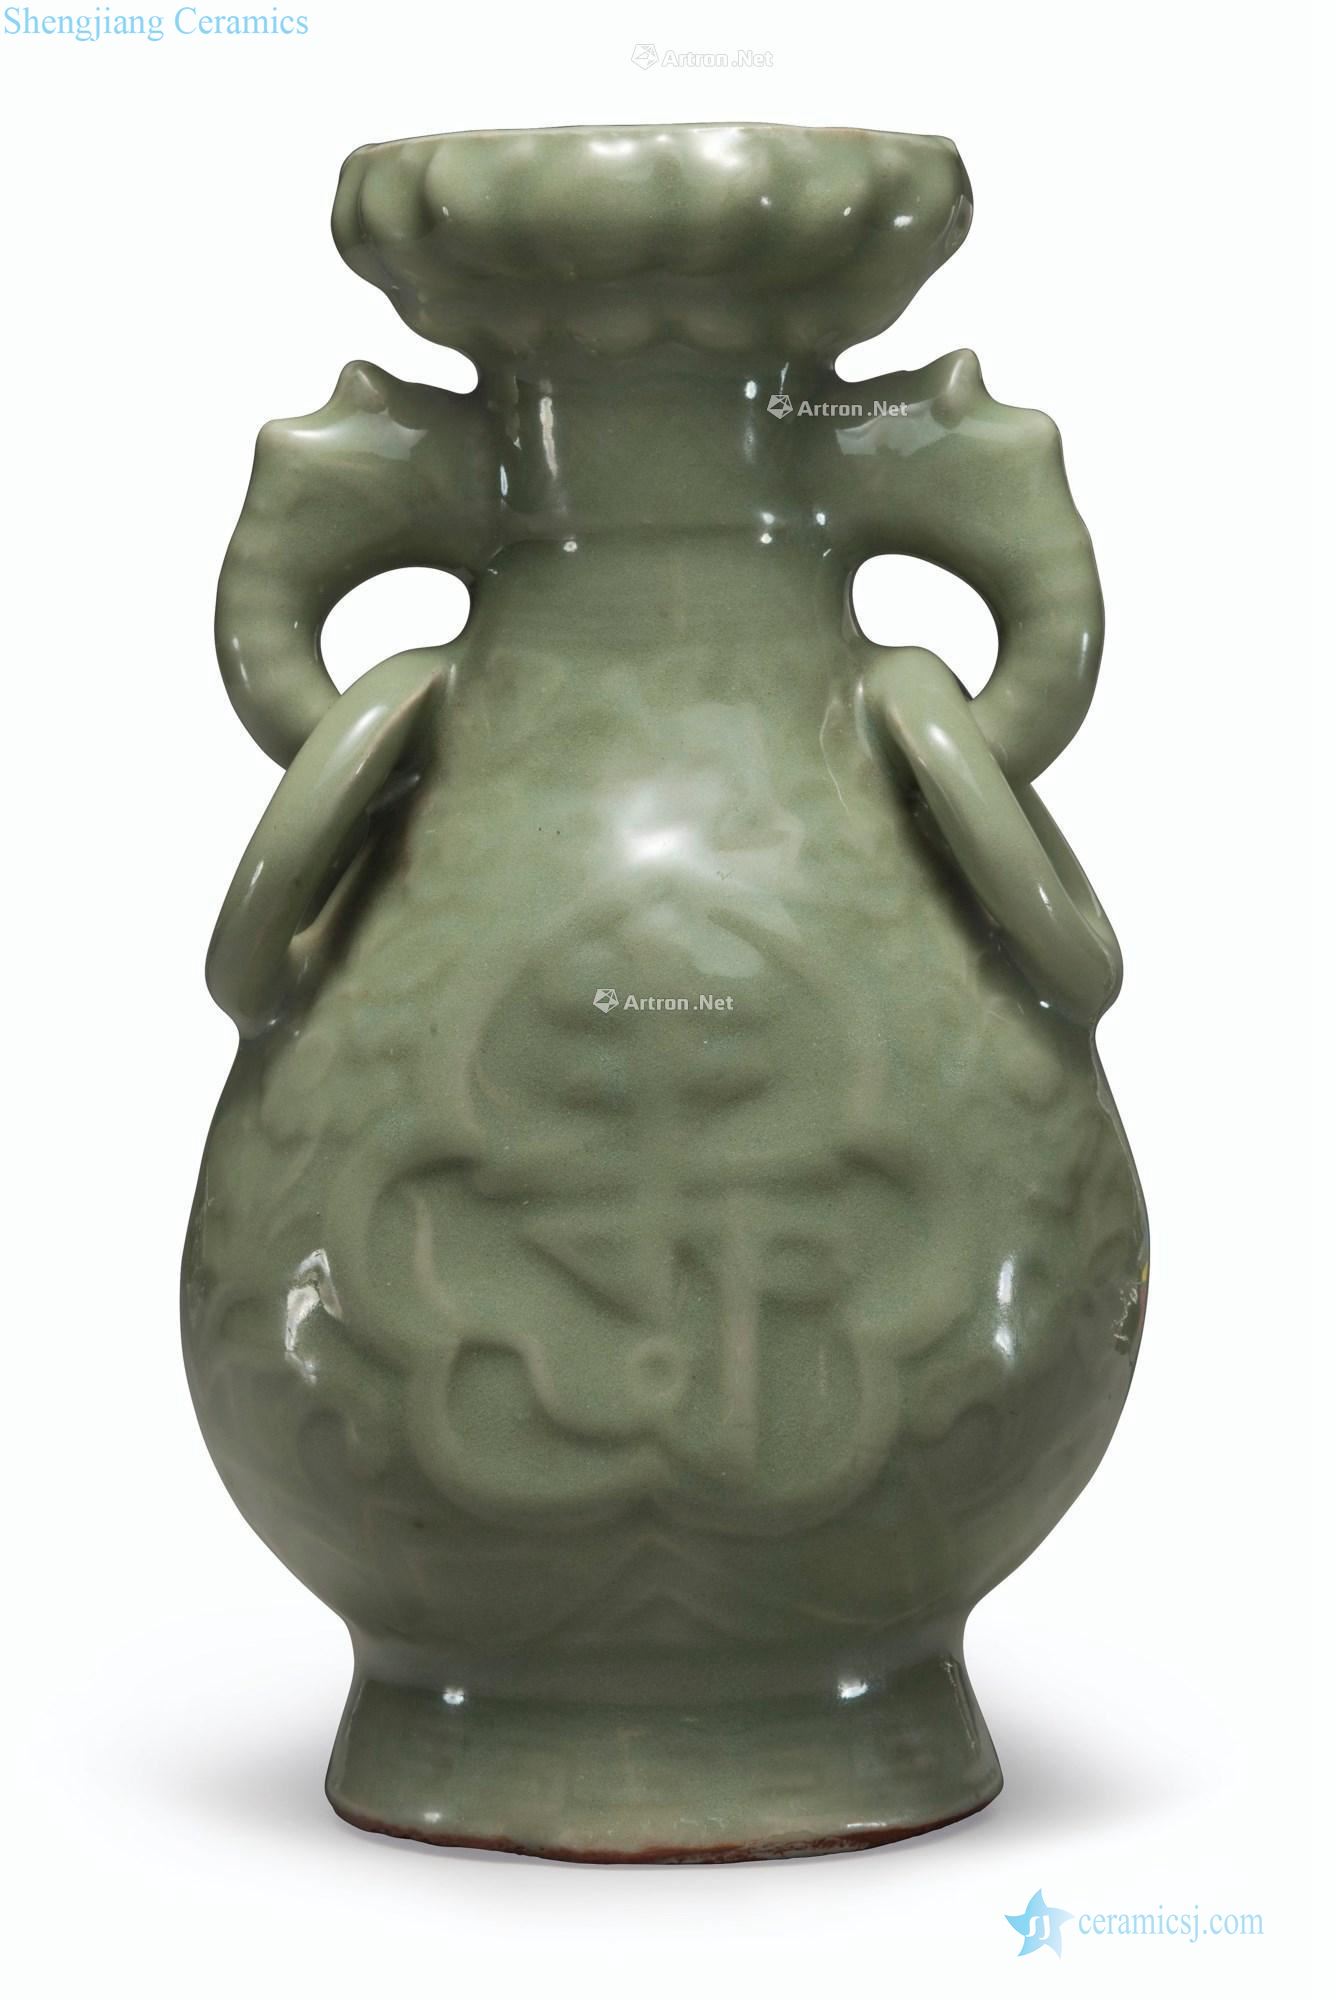 The Ming dynasty, A 14th century LONGQUAN CELADON RING - HANDLED VASE